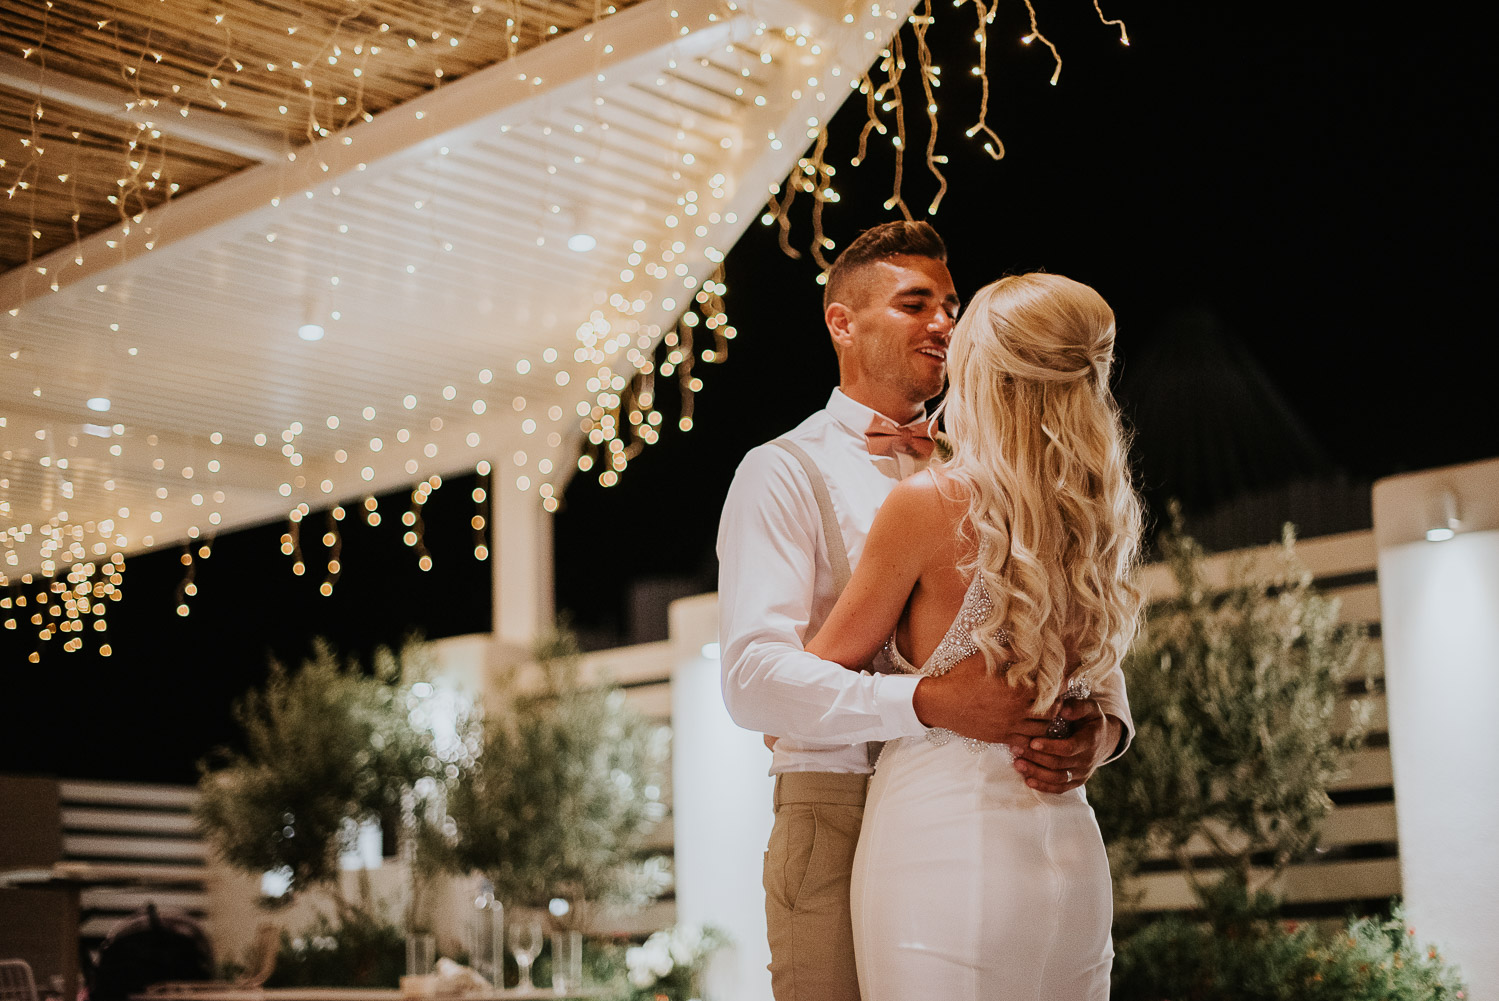 Wedding photographer Santorini: bride and the groom under the fairy lights embraced for the first dance by Ben and Vesna.